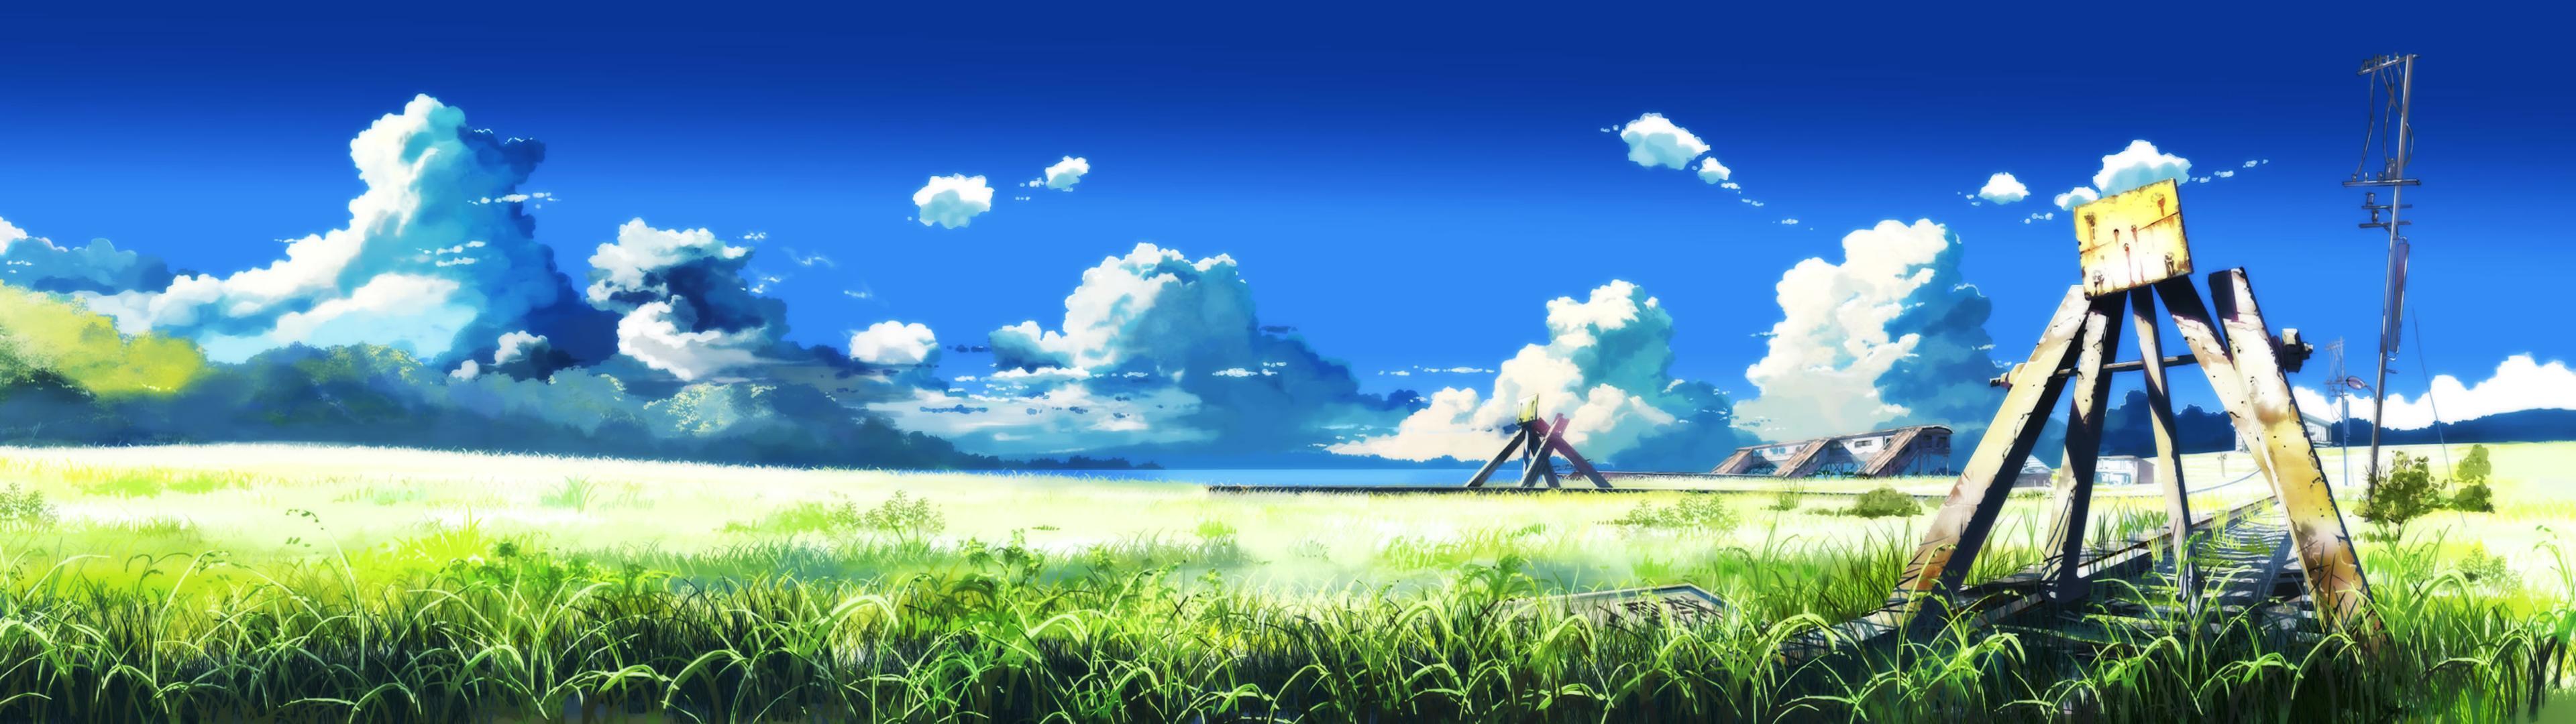 3840 X 1080 Anime Wallpapers Top Free 3840 X 1080 Anime Backgrounds Wallpaperaccess